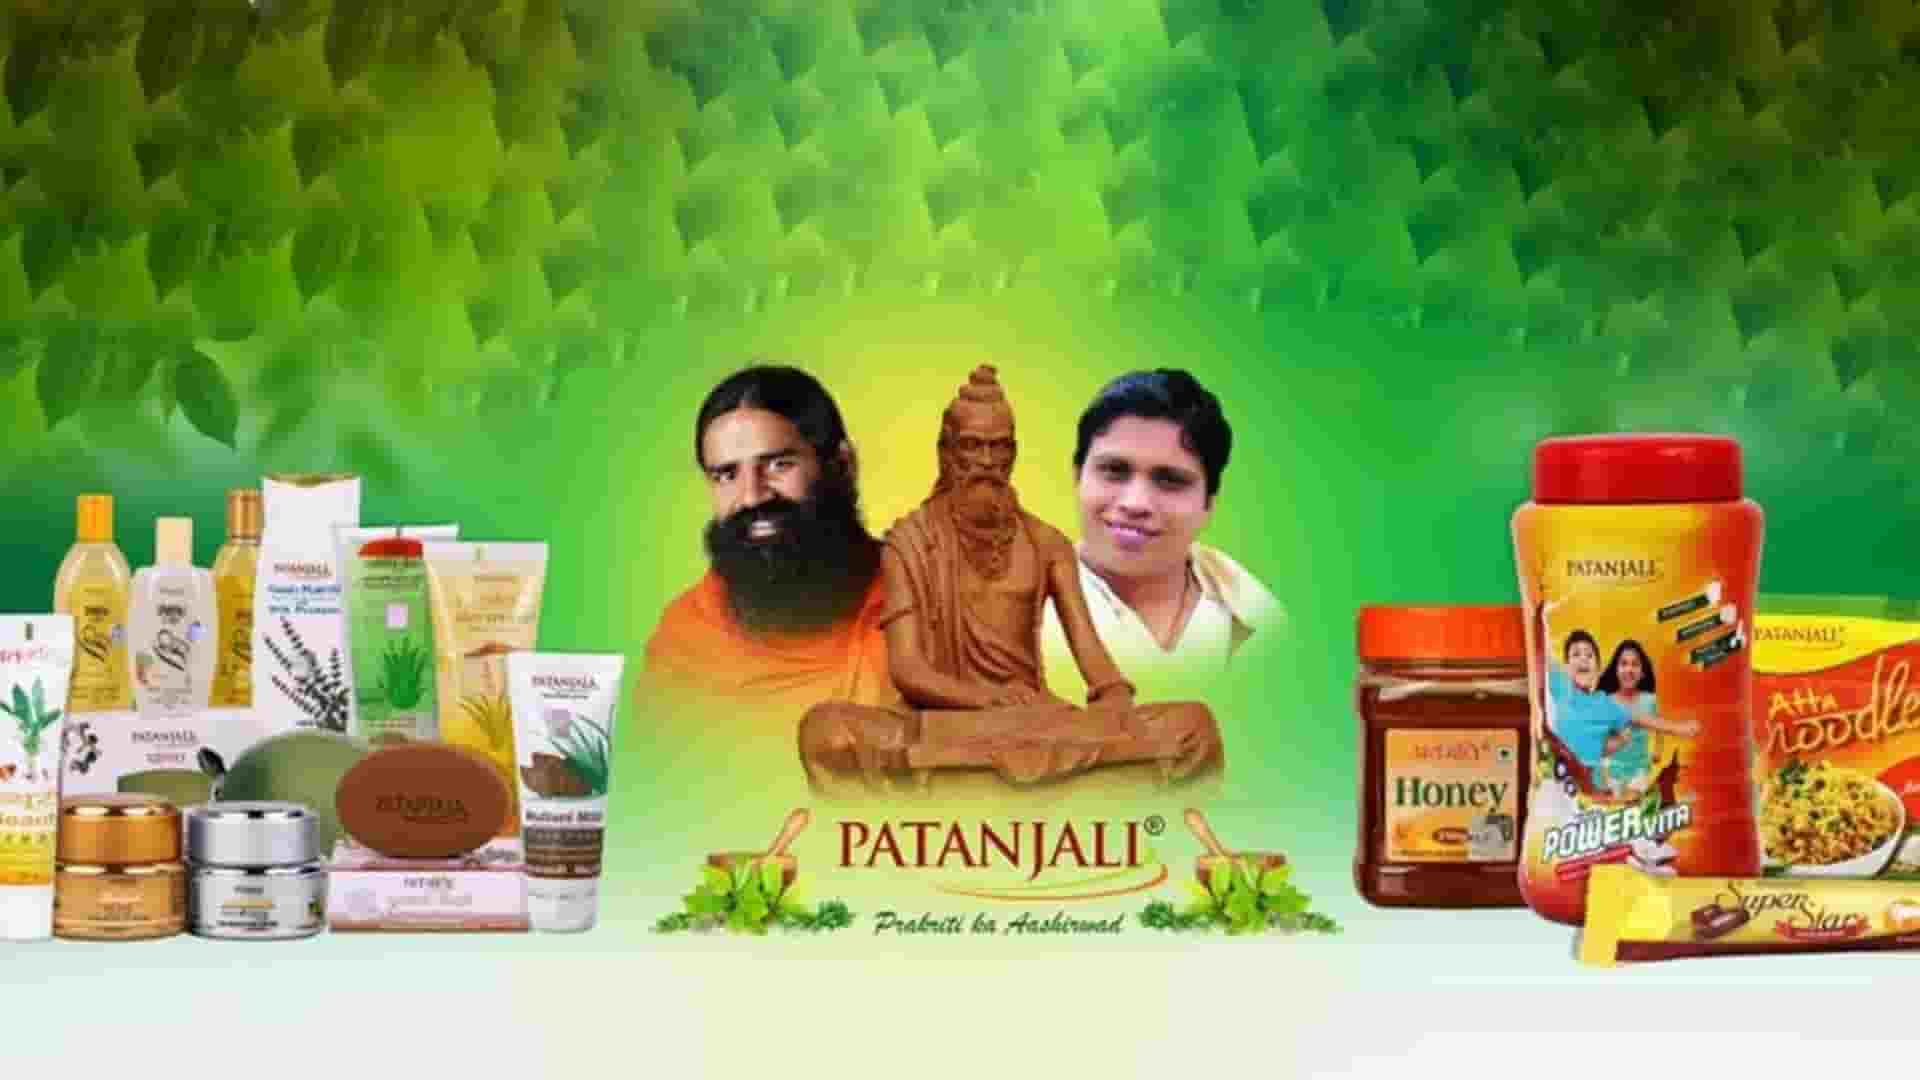 What Made Patanjali Ayurved The Massive FMCG Firm - Patanjali Case Study